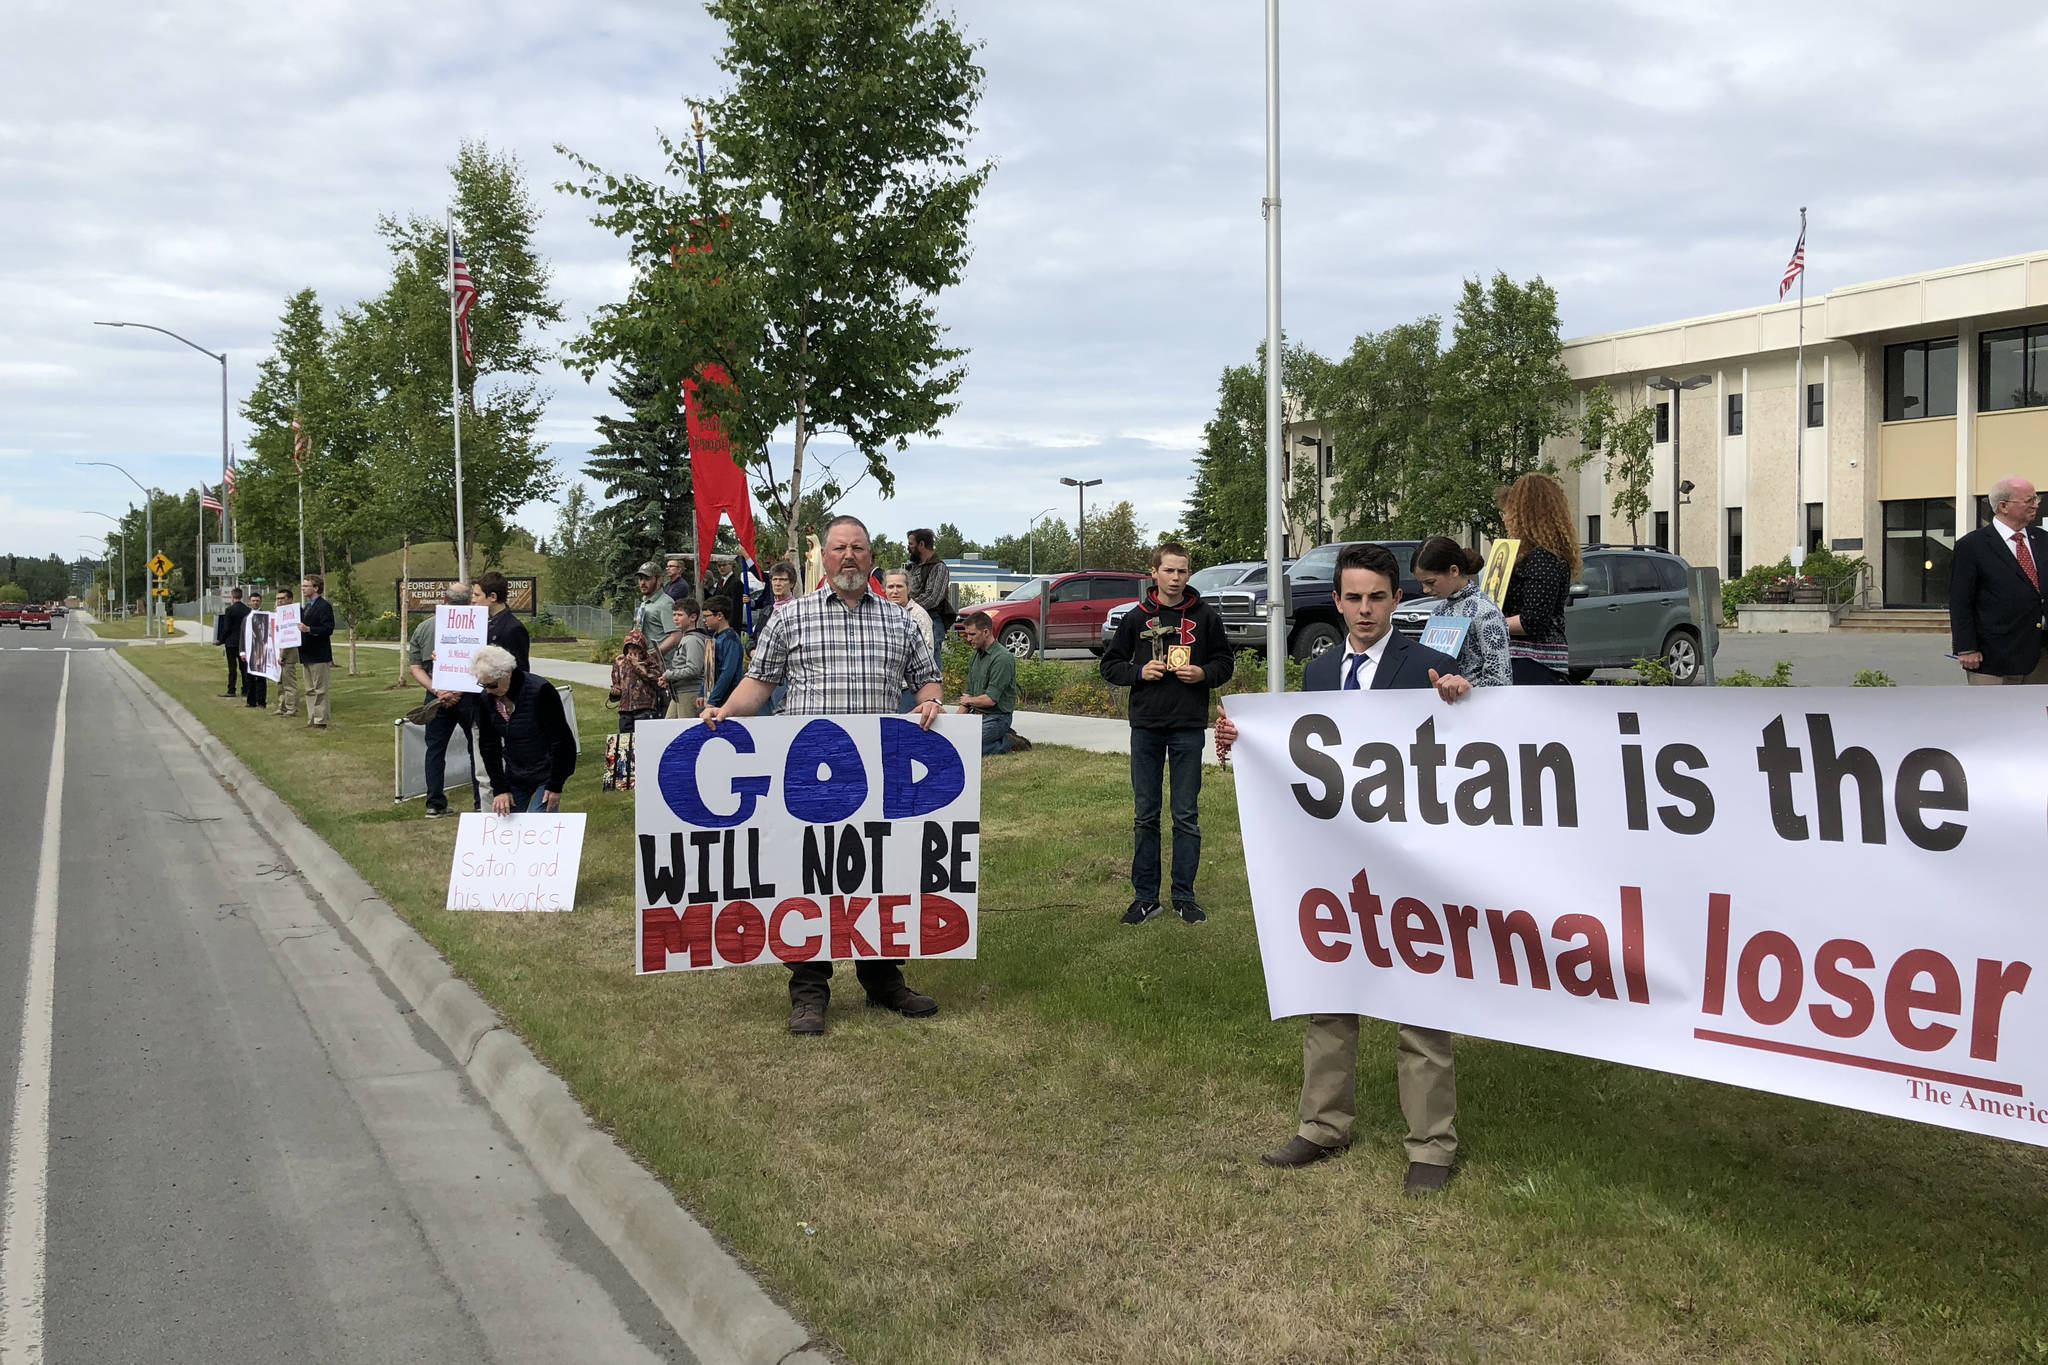 Demonstrators hold signs outside the Kenai Peninsula Borough building in protest of an invocation by a member of the Satanic Temple on Tuesday, June 18, 2019 in Soldotna, Alaska. The invocation was the first given by the Satanic Temple since the borough changed its invocation policy following an Alaska Superior Court decision finding the policy unconstitutional and in violation of the state’s constitution’s establishment clause. (Photo courtesy Aud Walaszek)